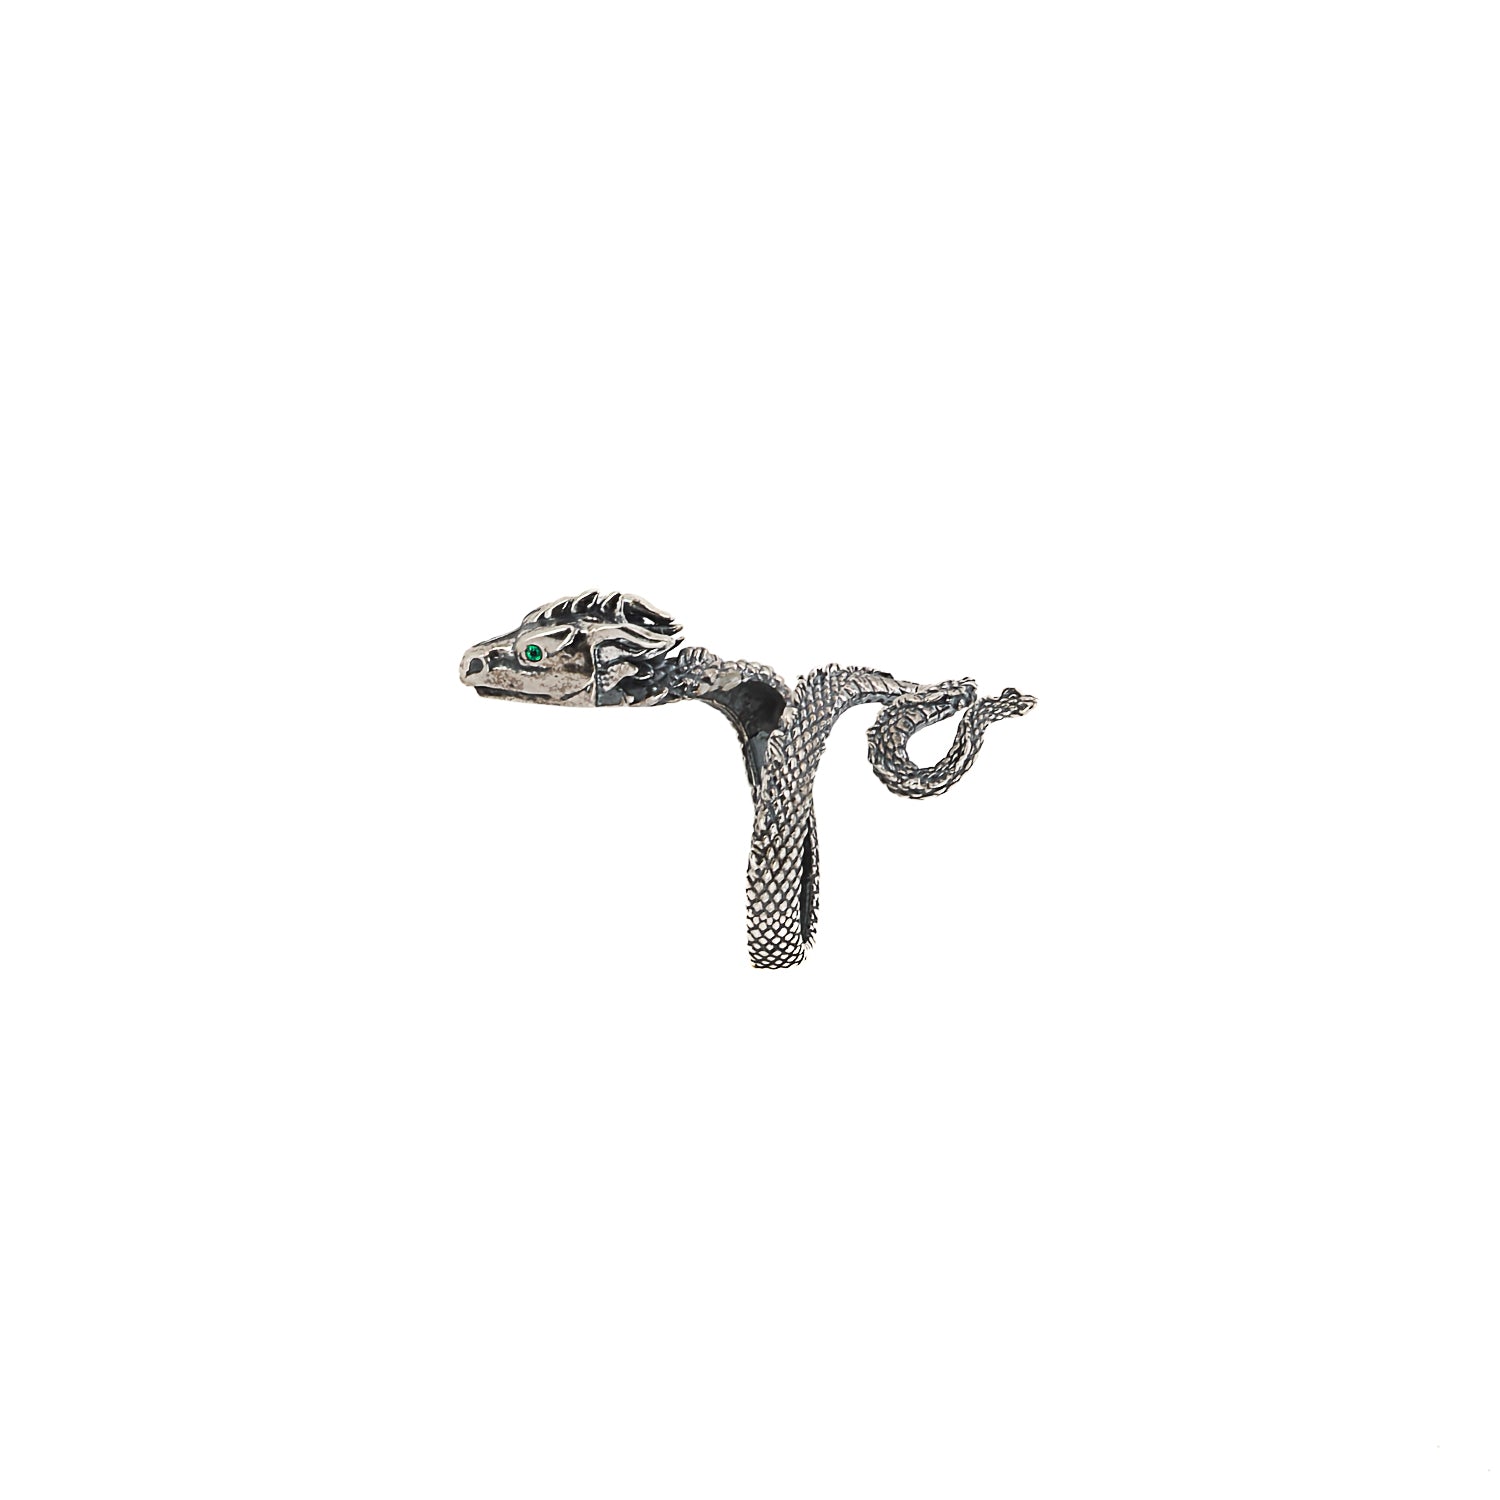 Elegant Snake Motif Ring - Crafted from 925 Sterling Silver